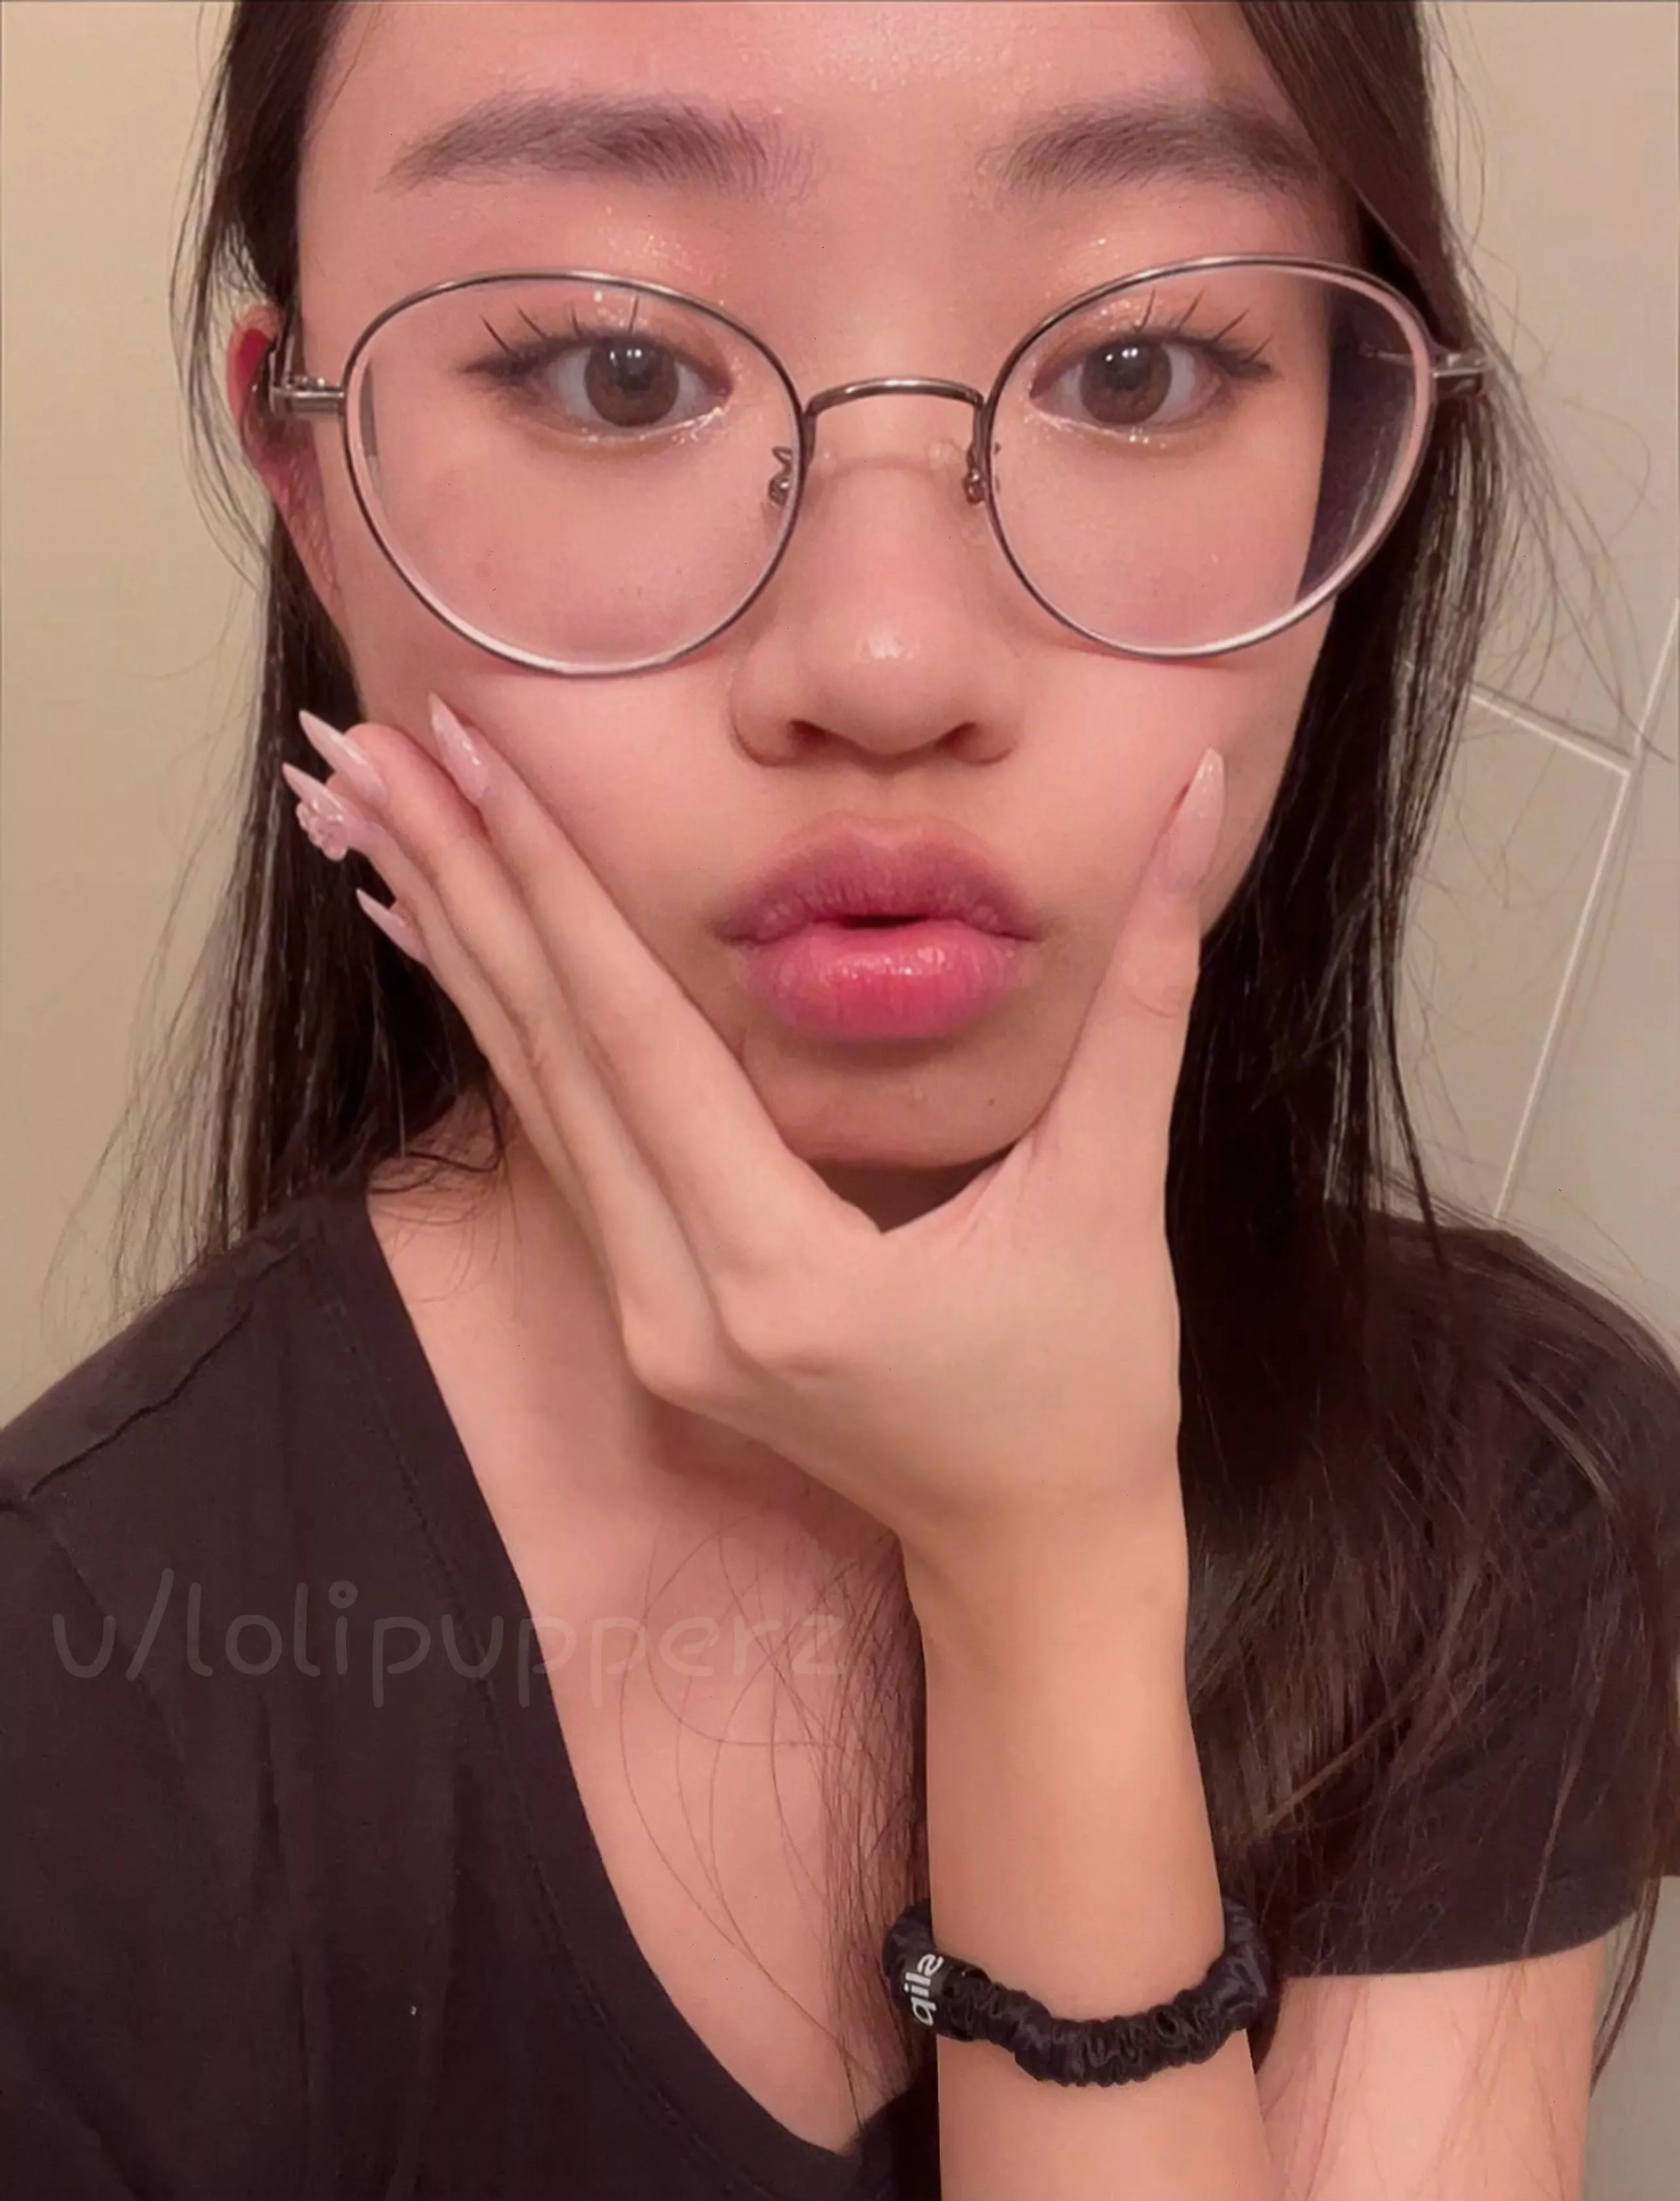 Pretty Lips Porn - pretty lips for making out and sucking your cock ðŸ¥ºðŸ’— nudes by lolipupperz